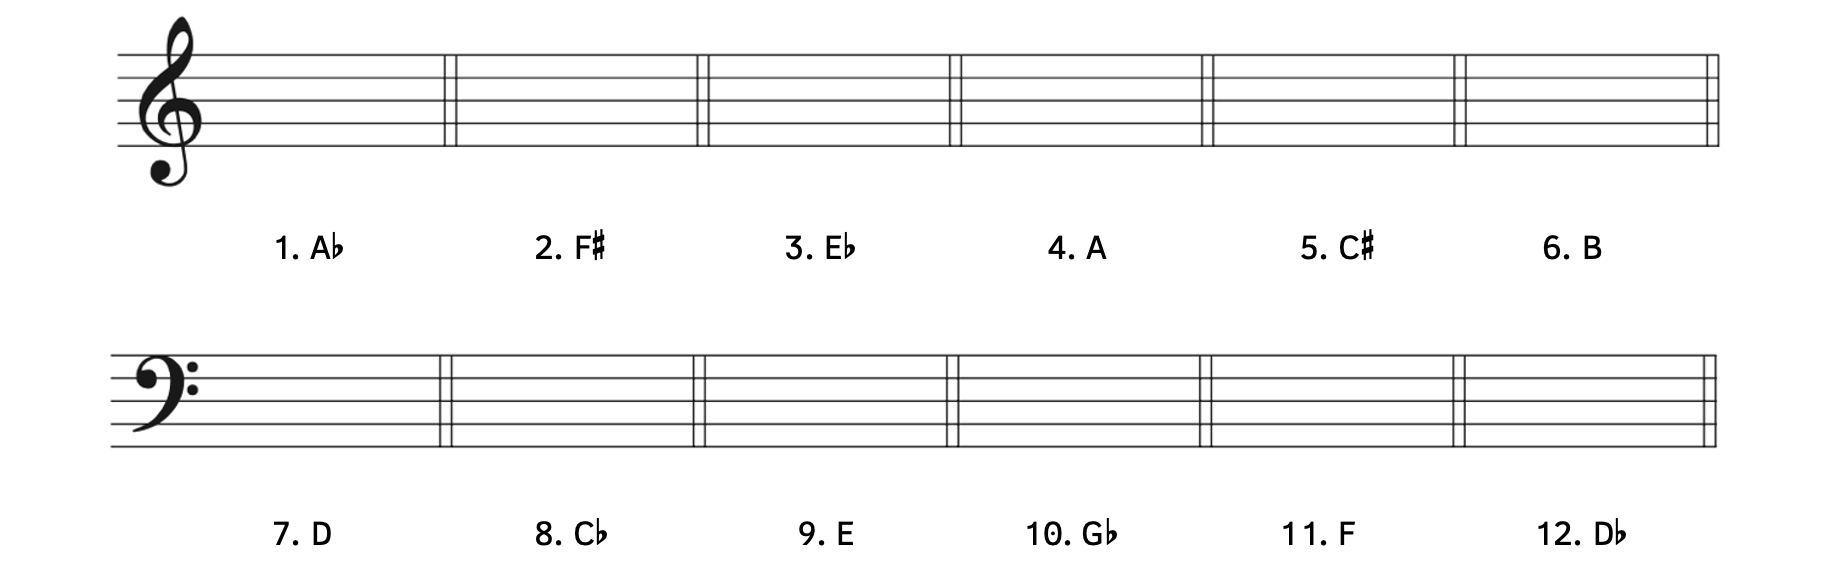 Exercise asking to write the given major key signatures. Numbers 1-6 are in treble clef. Number 1, A-flat major. Number 2, F-sharp major. Number 3, E-flat major. Number 4, A major. Number 5, C-sharp major. Number 6, B major. Numbers 7-12 are in the bass clef. Number 7, D major. Number 8, C-flat major. Number 9, E major. Number 10, G-flat major. Number 11, F major. Number 12, D-flat major.